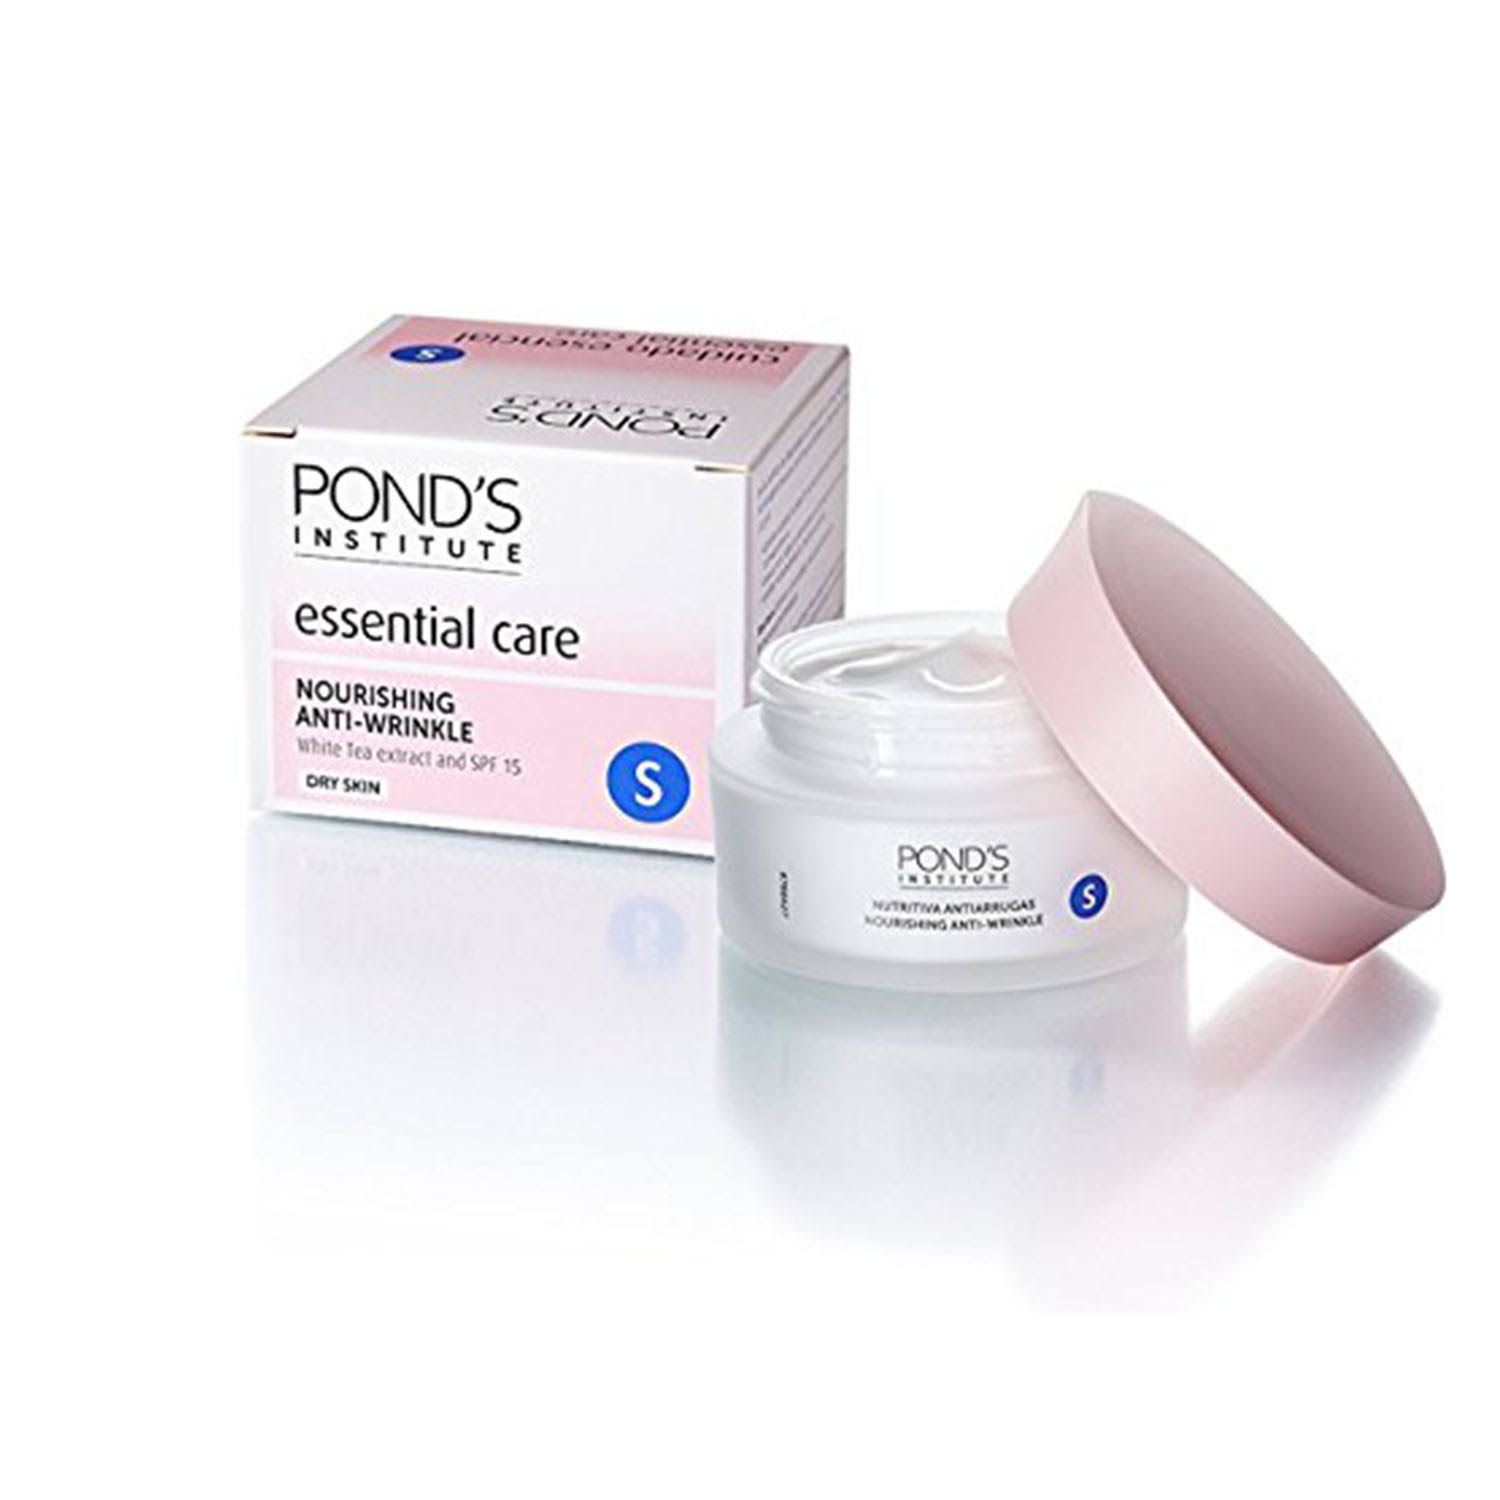 Pond's Institute Essential Care Nourishing Anti-Wrinkle Day and Night Cream - 50ml